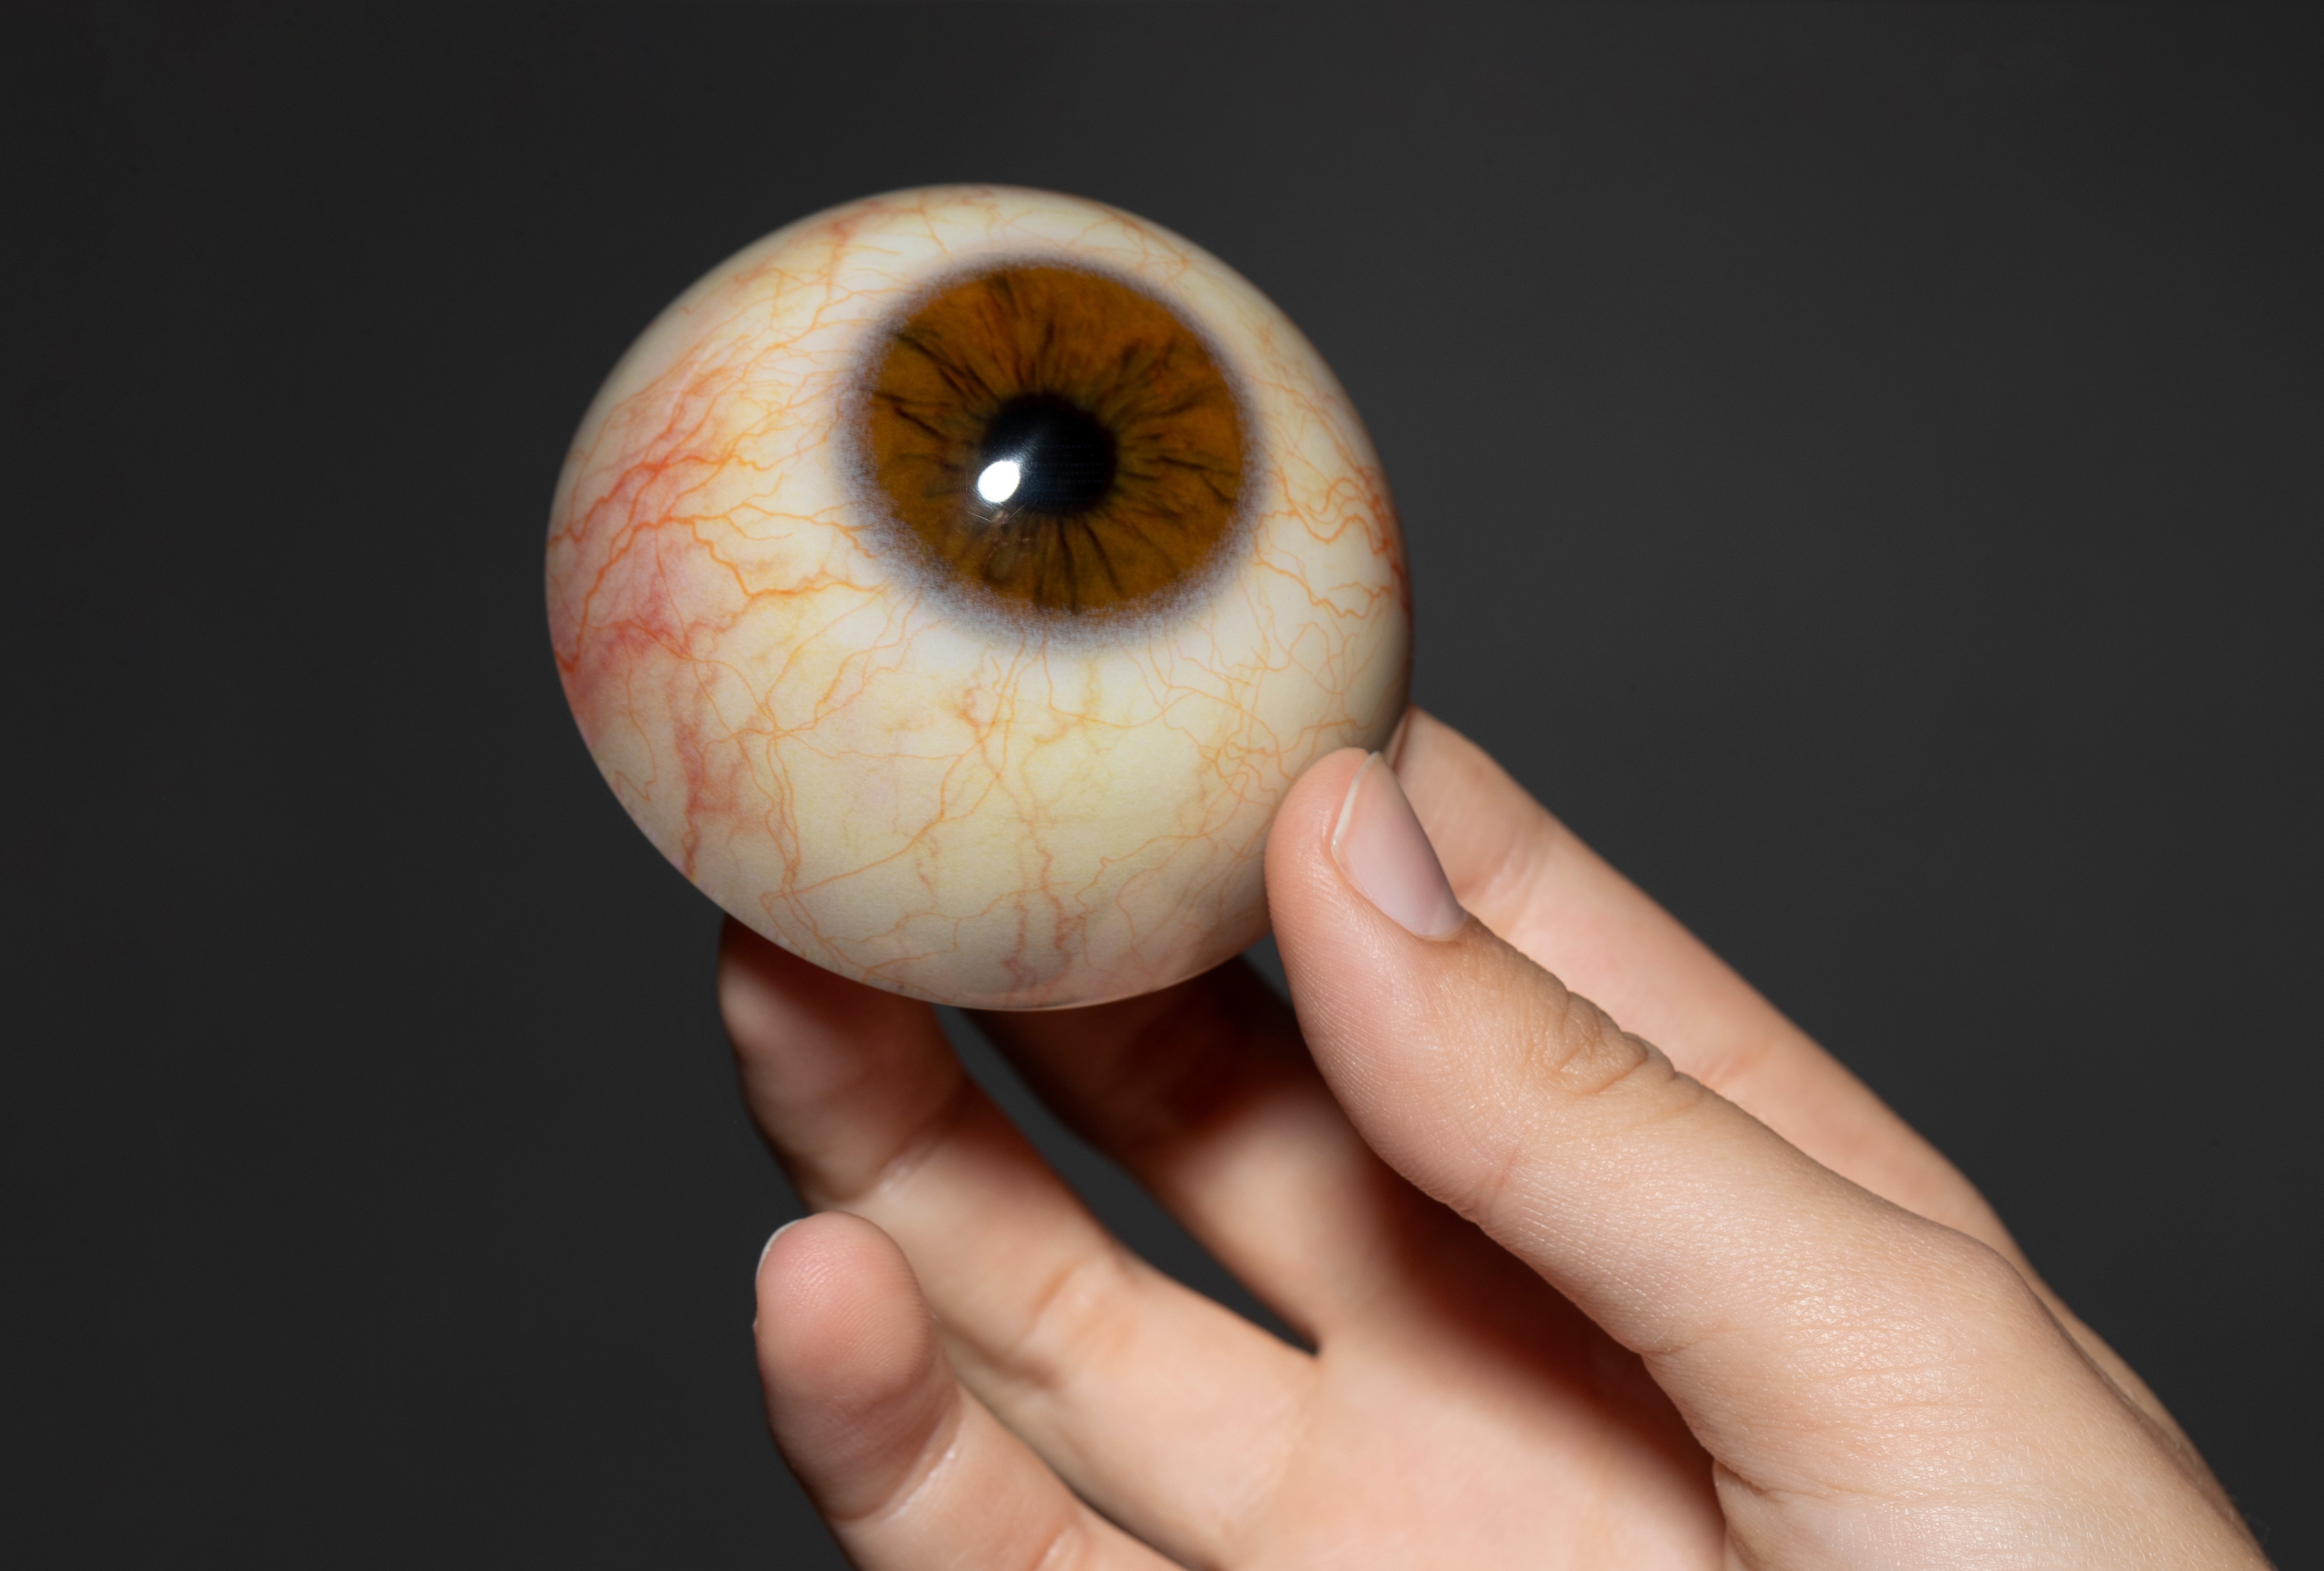 An example of a voxel printed eye at 2.4:1 scale.